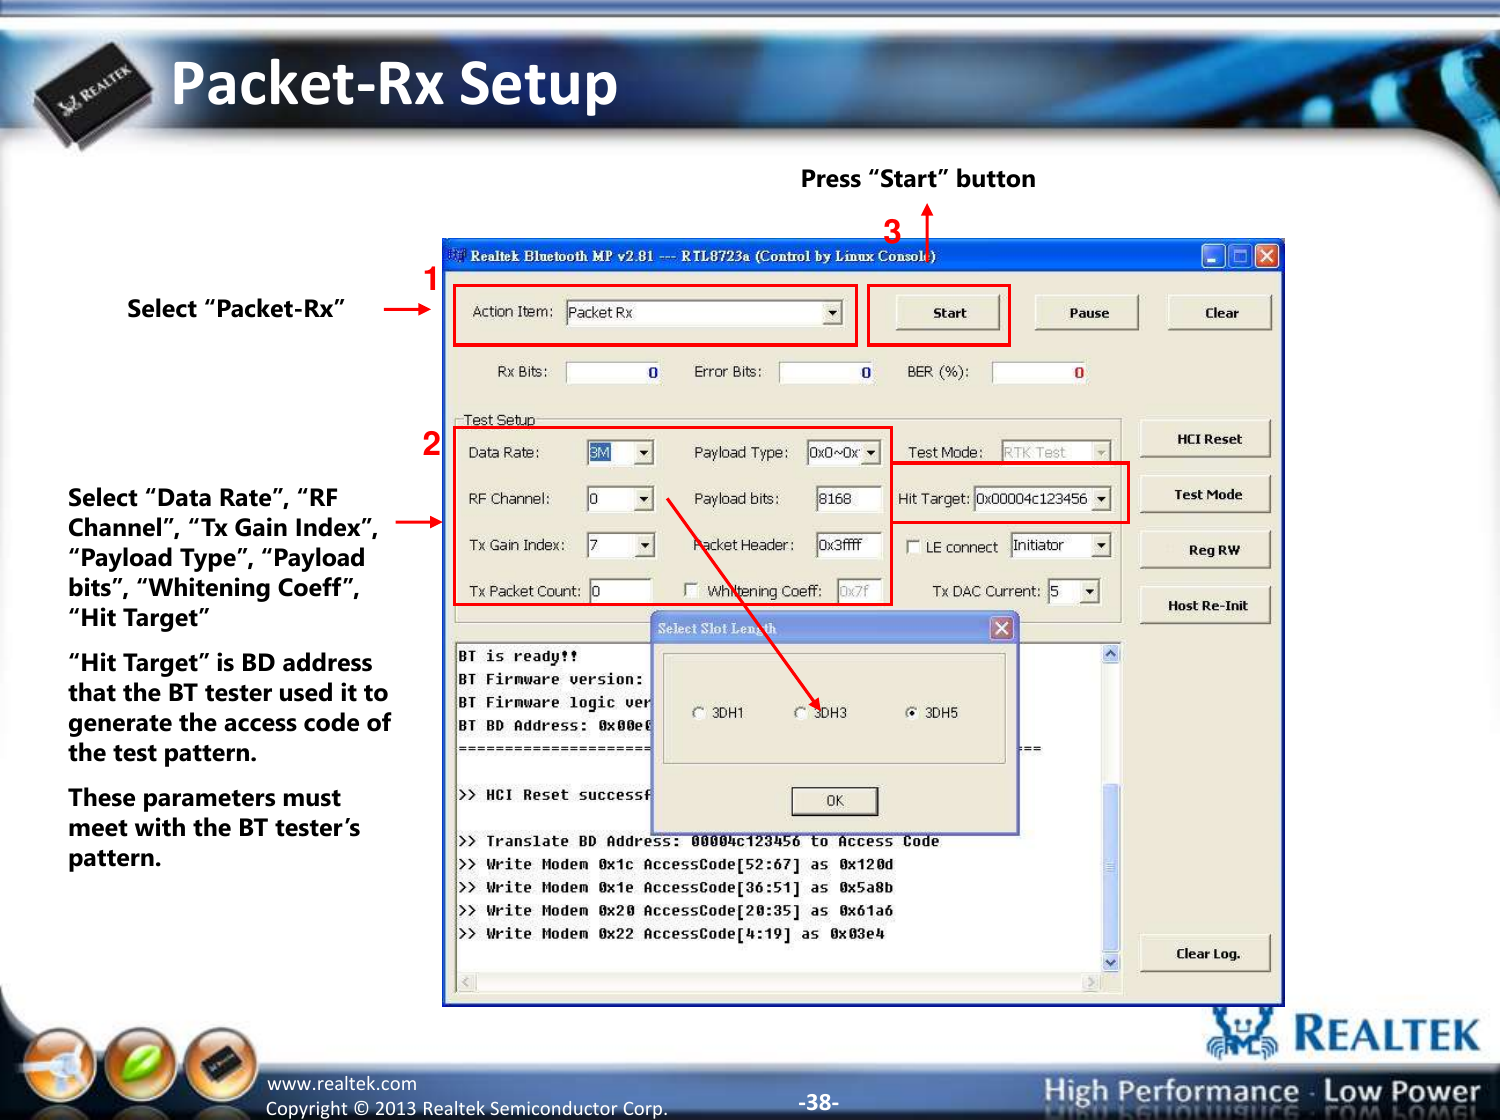 -38- Copyright ©  2013 Realtek Semiconductor Corp. www.realtek.com Packet-Rx Setup Select “Packet-Rx” 1 2 3 Select “Data Rate”, “RF Channel”, “Tx Gain Index”, “Payload Type”, “Payload bits”, “Whitening Coeff”, “Hit Target” “Hit Target” is BD address that the BT tester used it to generate the access code of the test pattern. These parameters must meet with the BT tester’s pattern.    Press “Start” button 